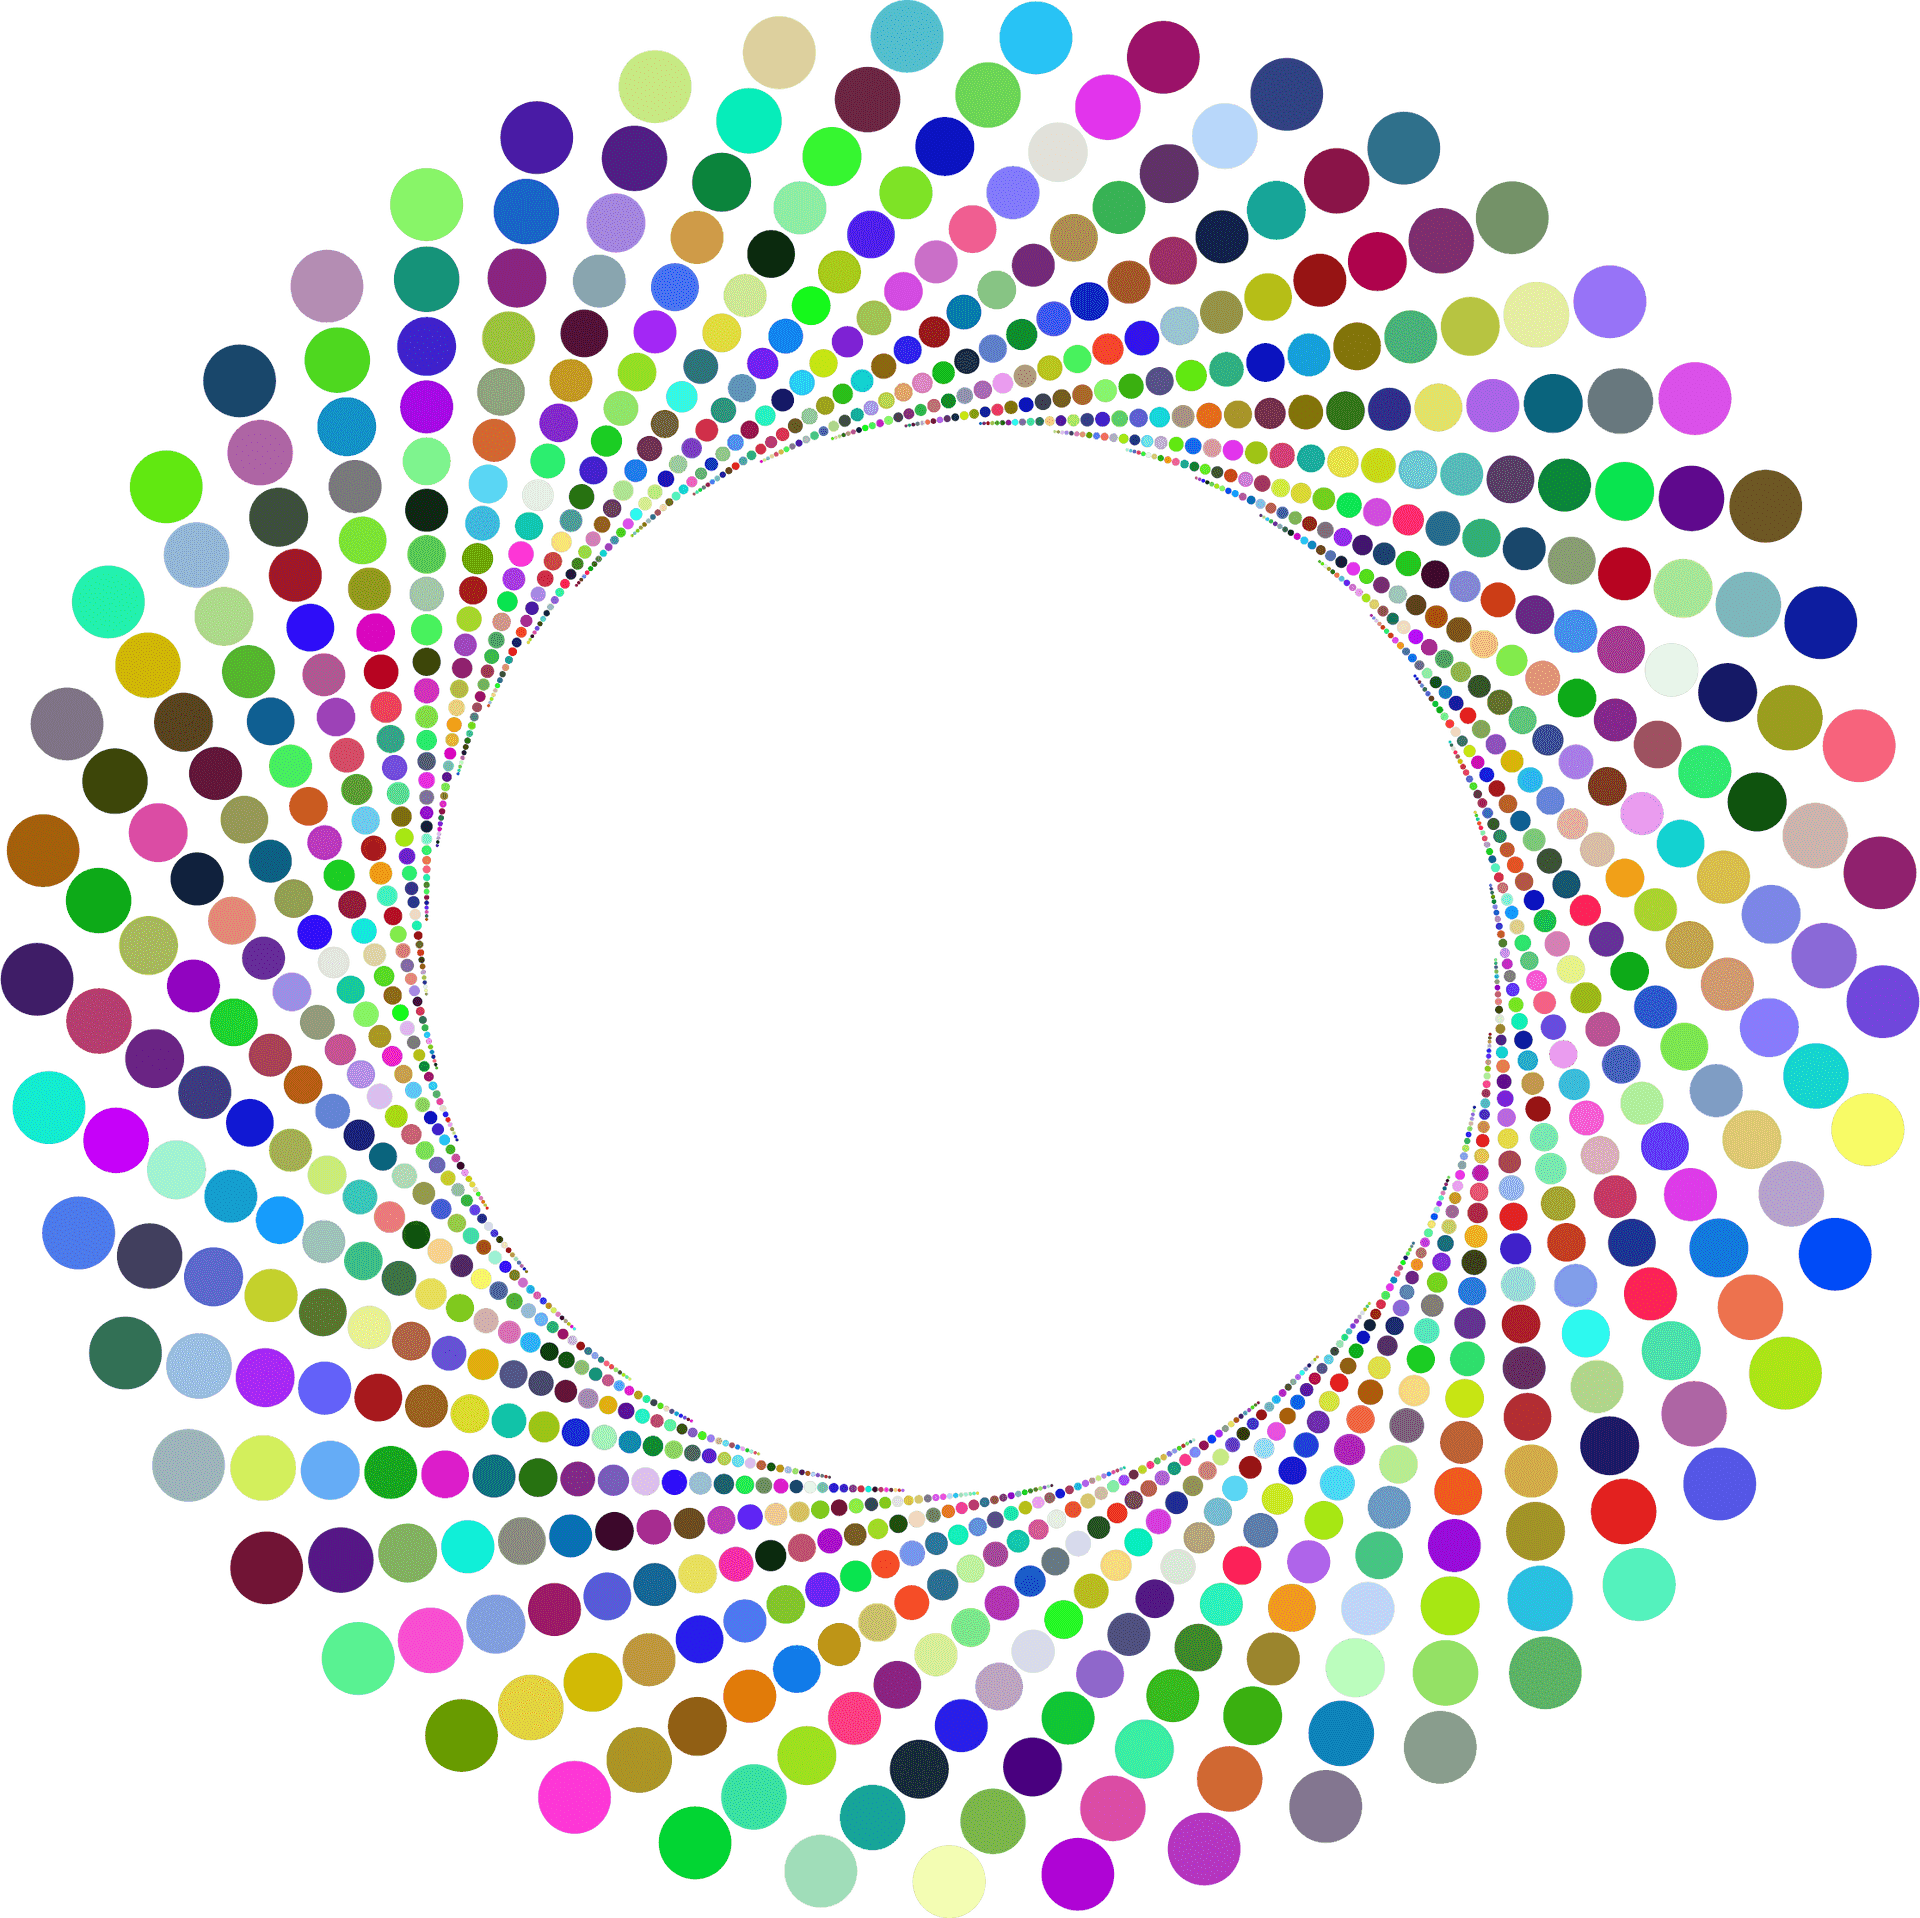 Colorful Dots Circular Frame Graphic PNG